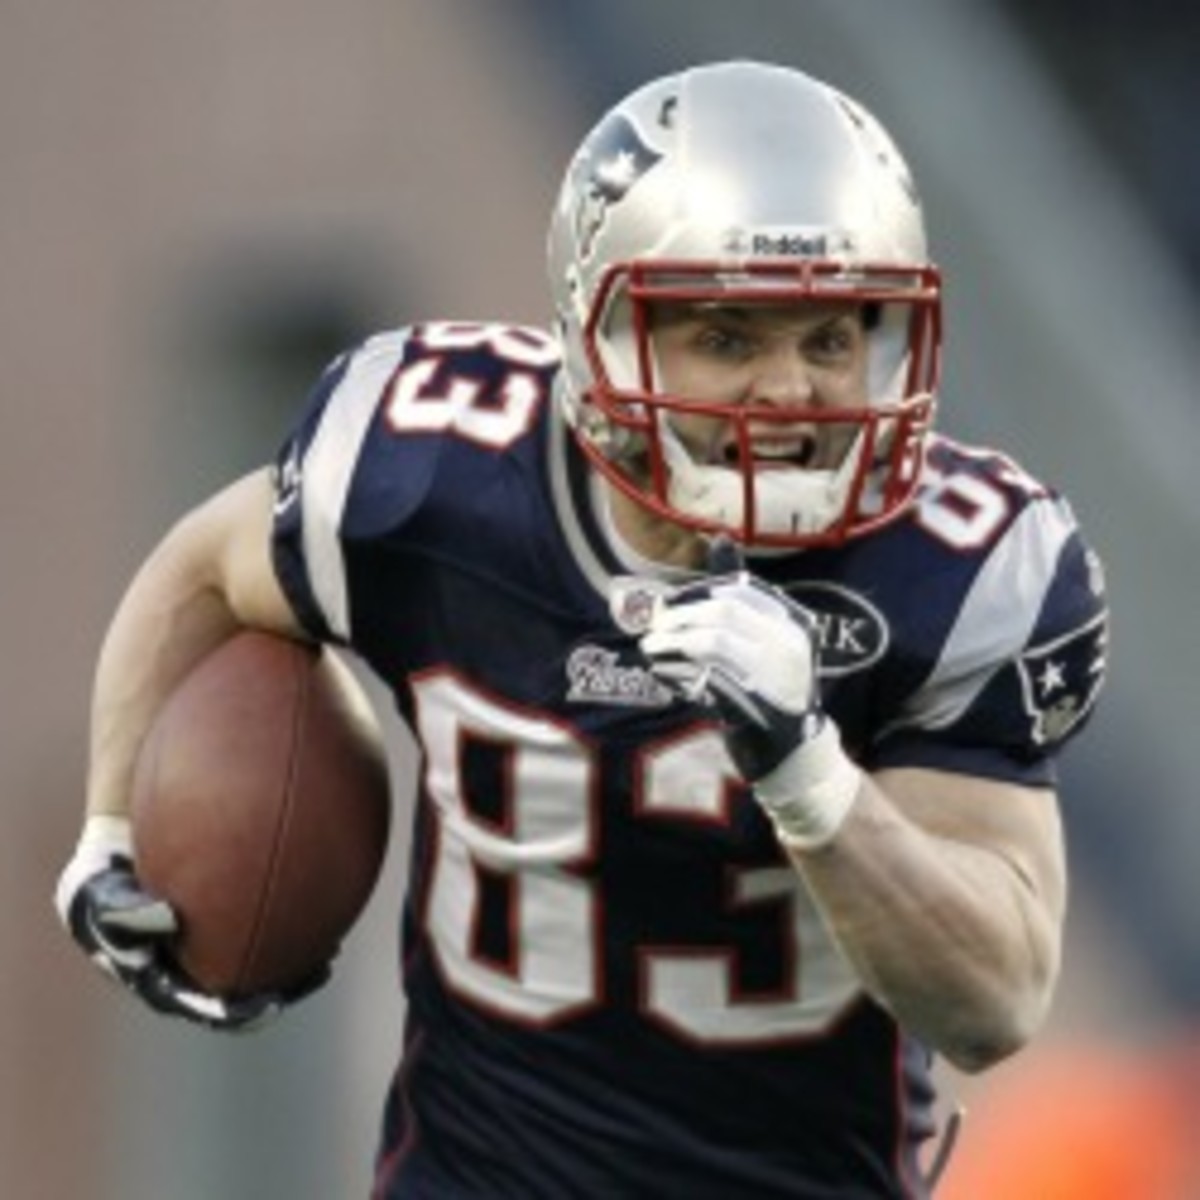 Patriots wide receiver Wes Welker will be a free-agent if the team doesn't sign him.(Winslow Townson/Getty Images)